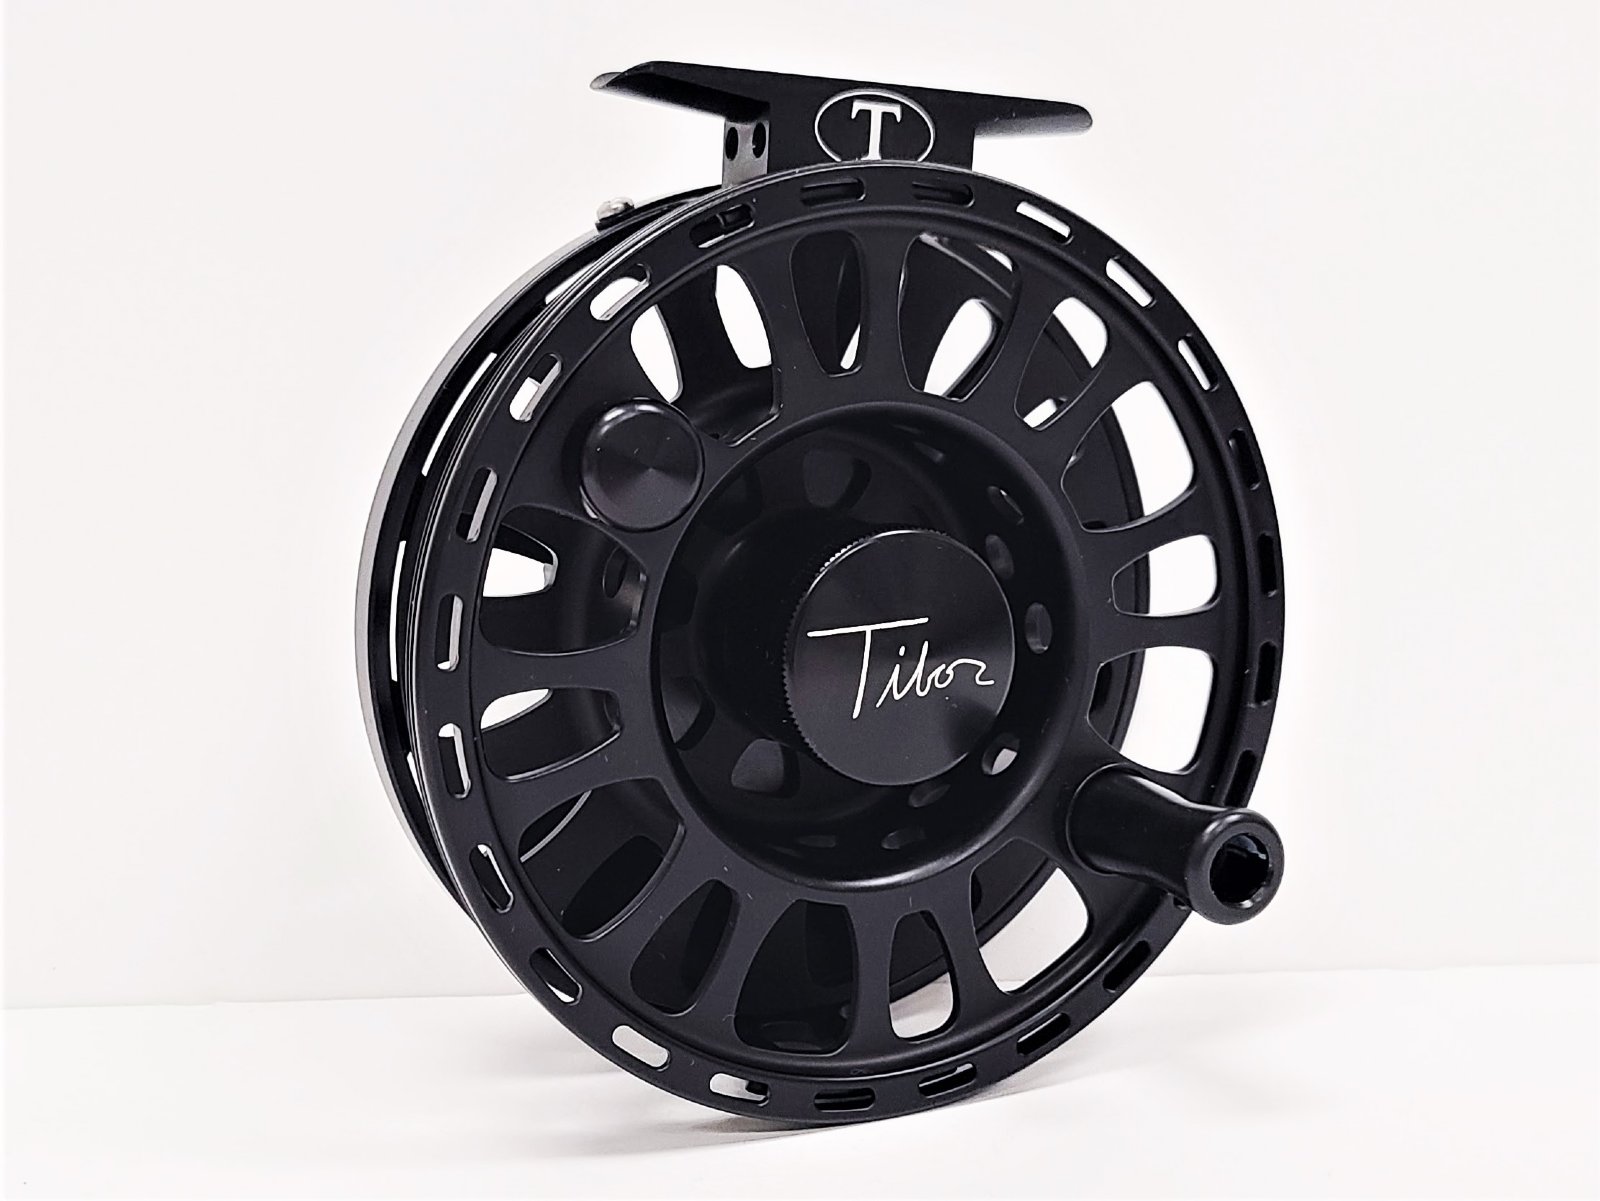 Tibor BackCountry Fly Reel - Frost Black - 5/6/7. Used but flawless 